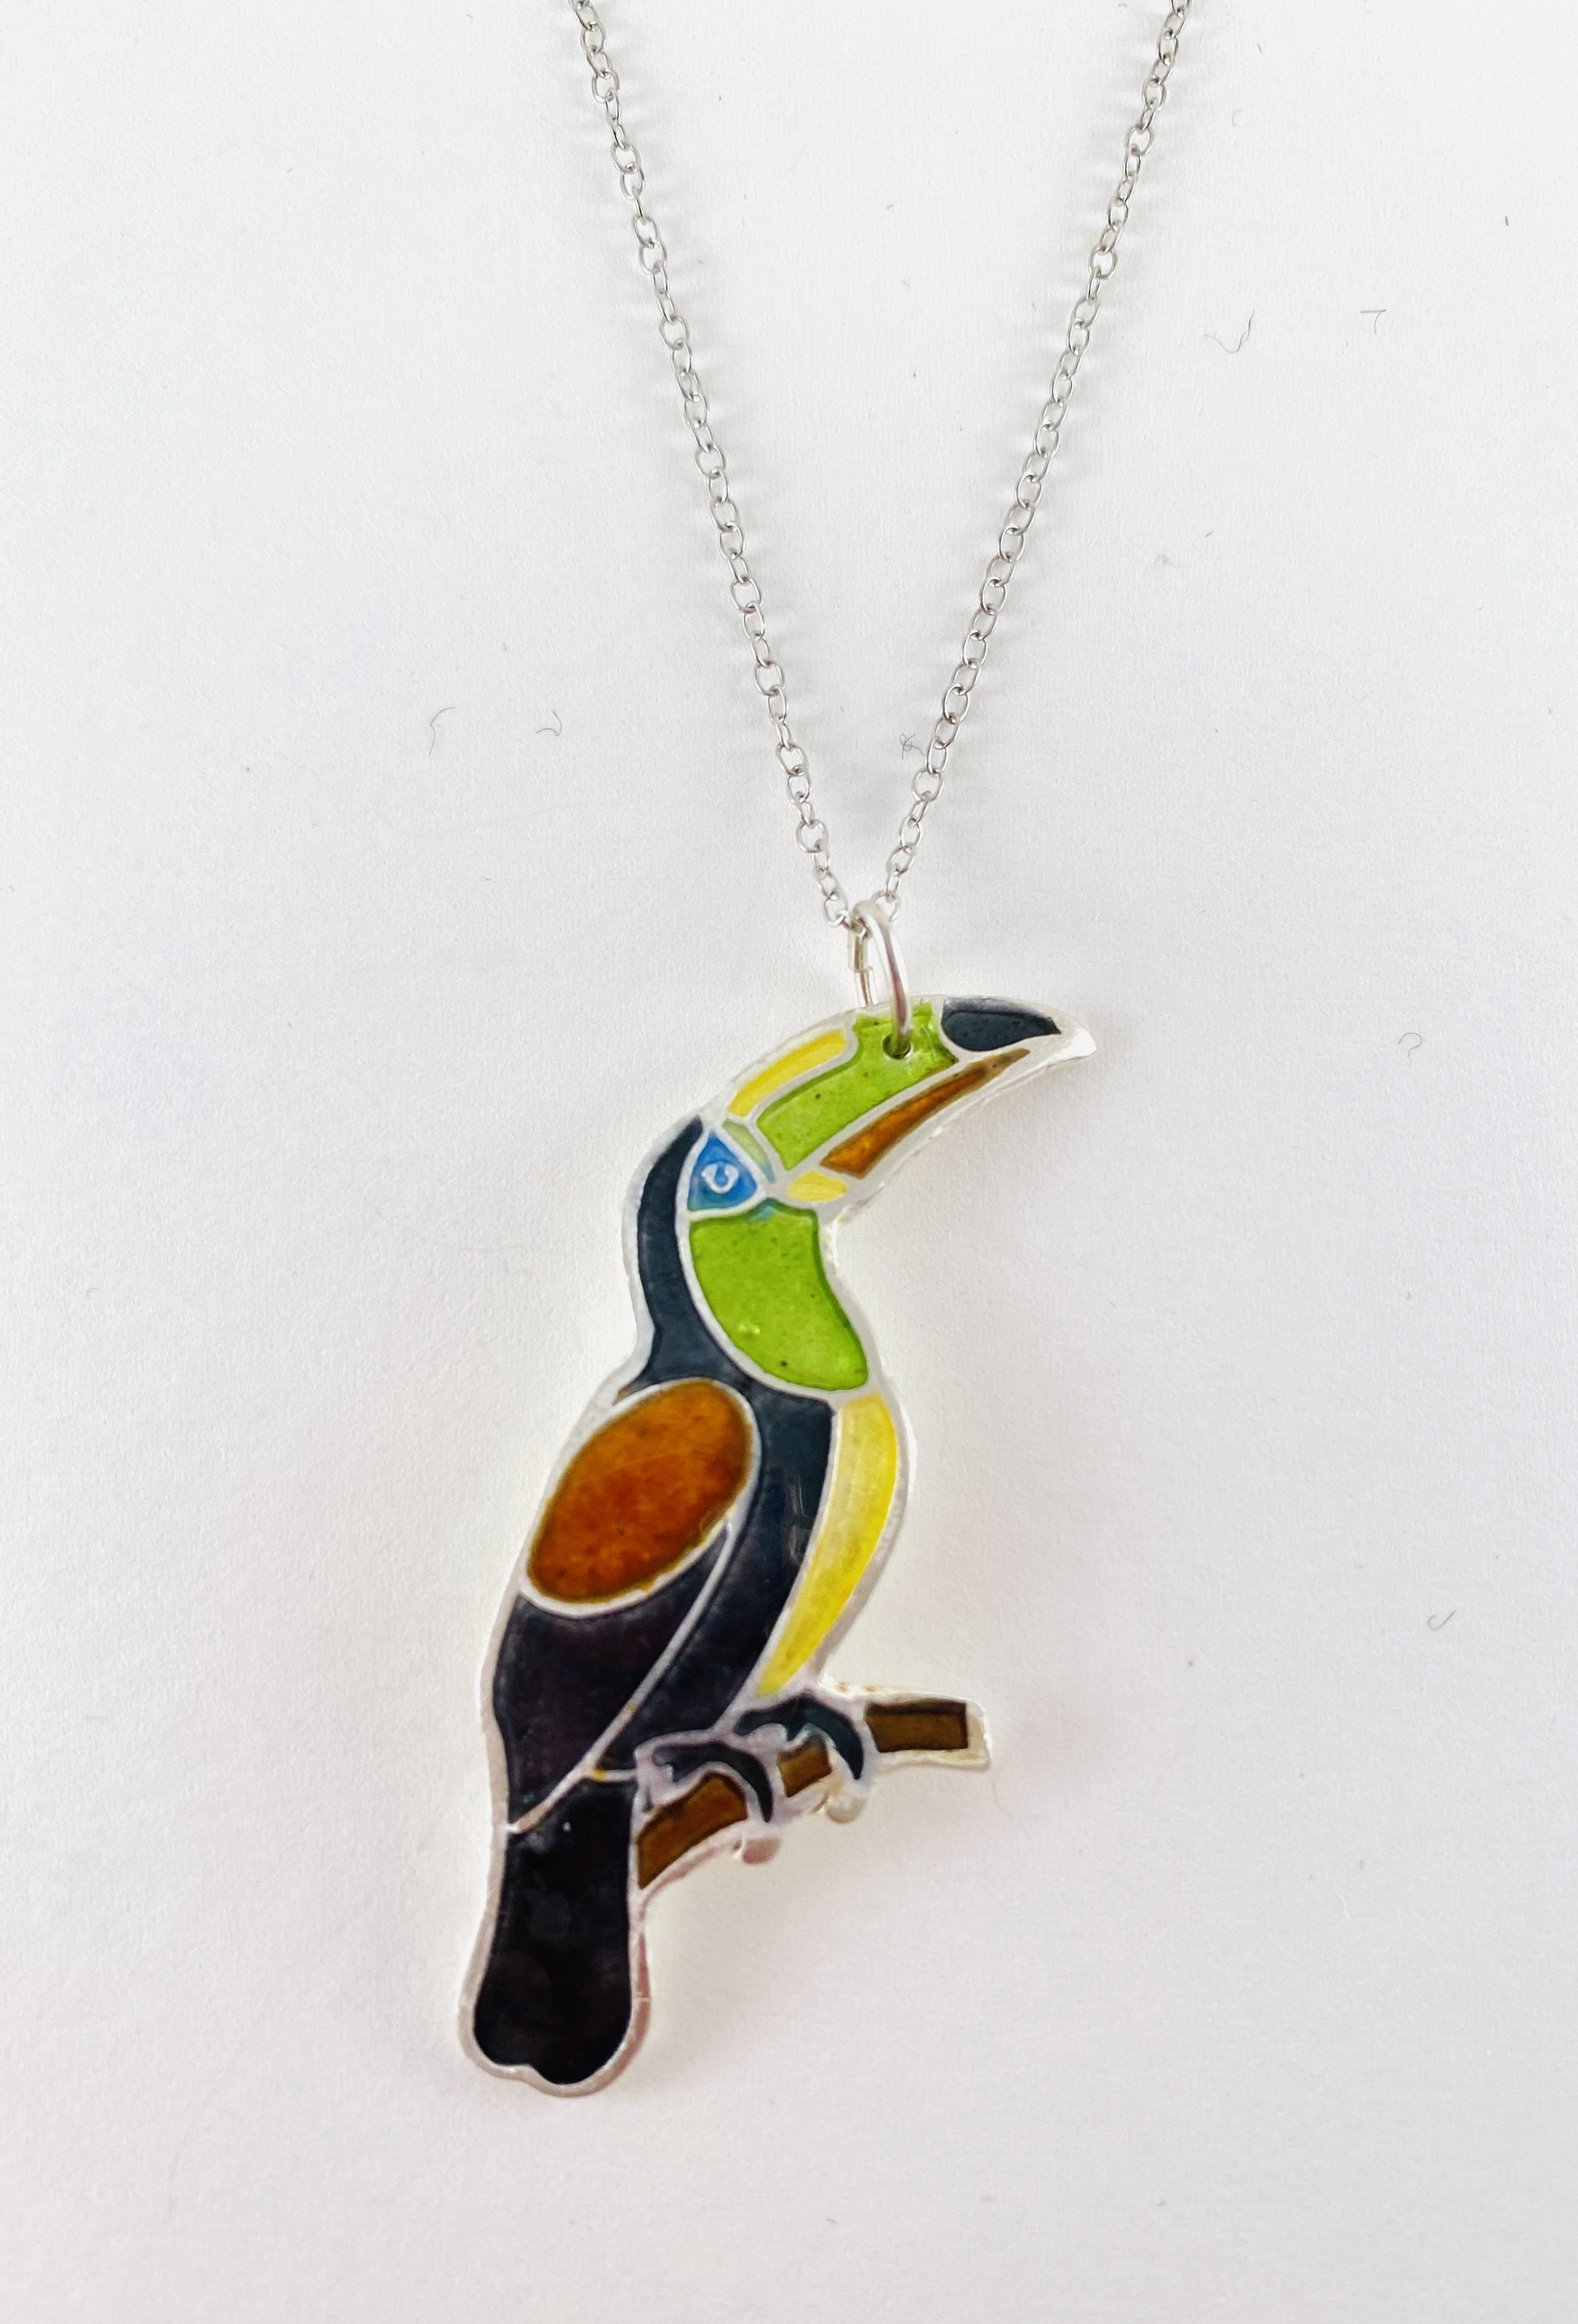 KH20-31 Champleve Toucan Pendant, 18" Silver Chain Necklace by Karen Hakim